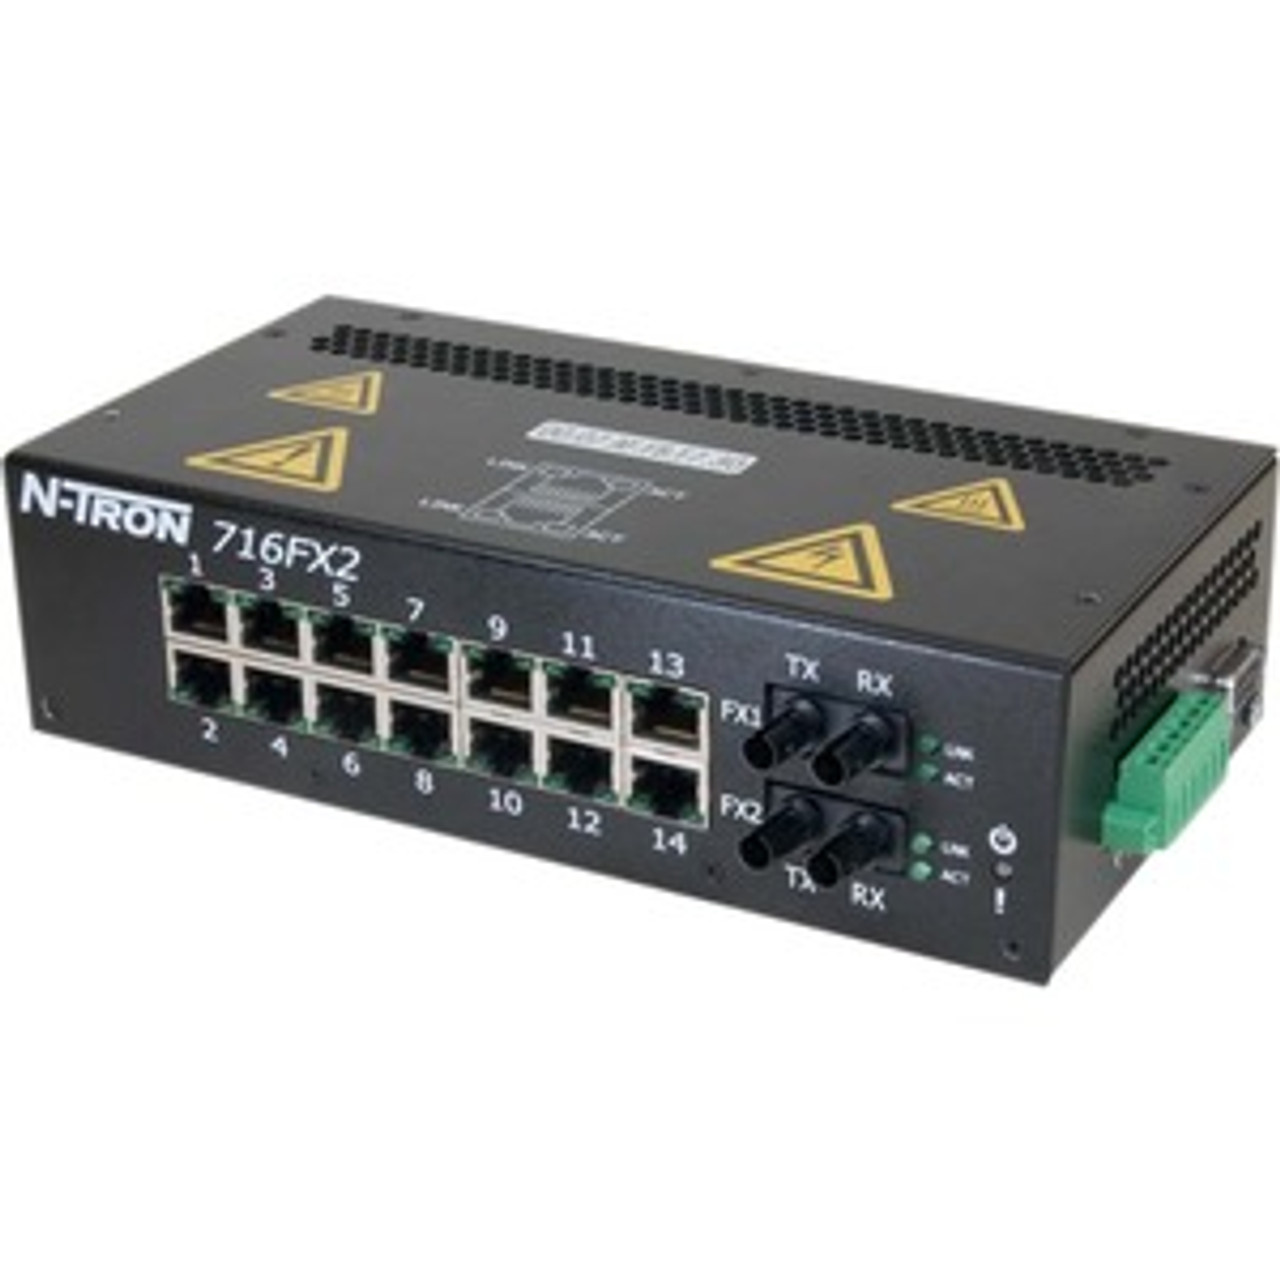 716FX2-SC B+B SmartWorx N-TRON 716FX2-SC Ethernet Switch - 16 Ports - Manageable - Fast Ethernet - 100Base-FX - 2 Layer Supported - Power Supply - Twisted